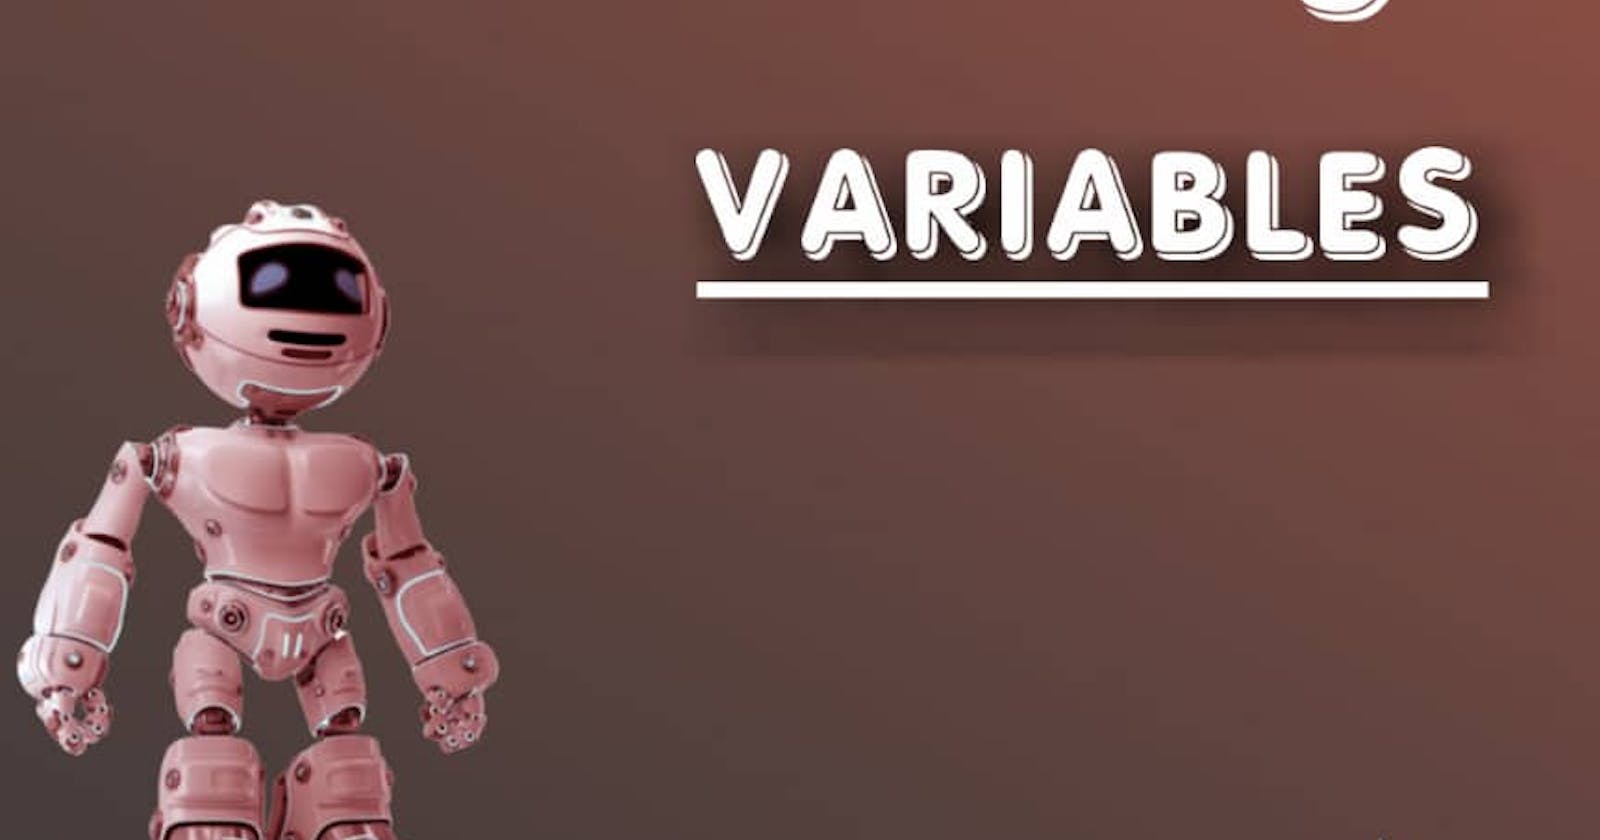 Tips on naming your variables